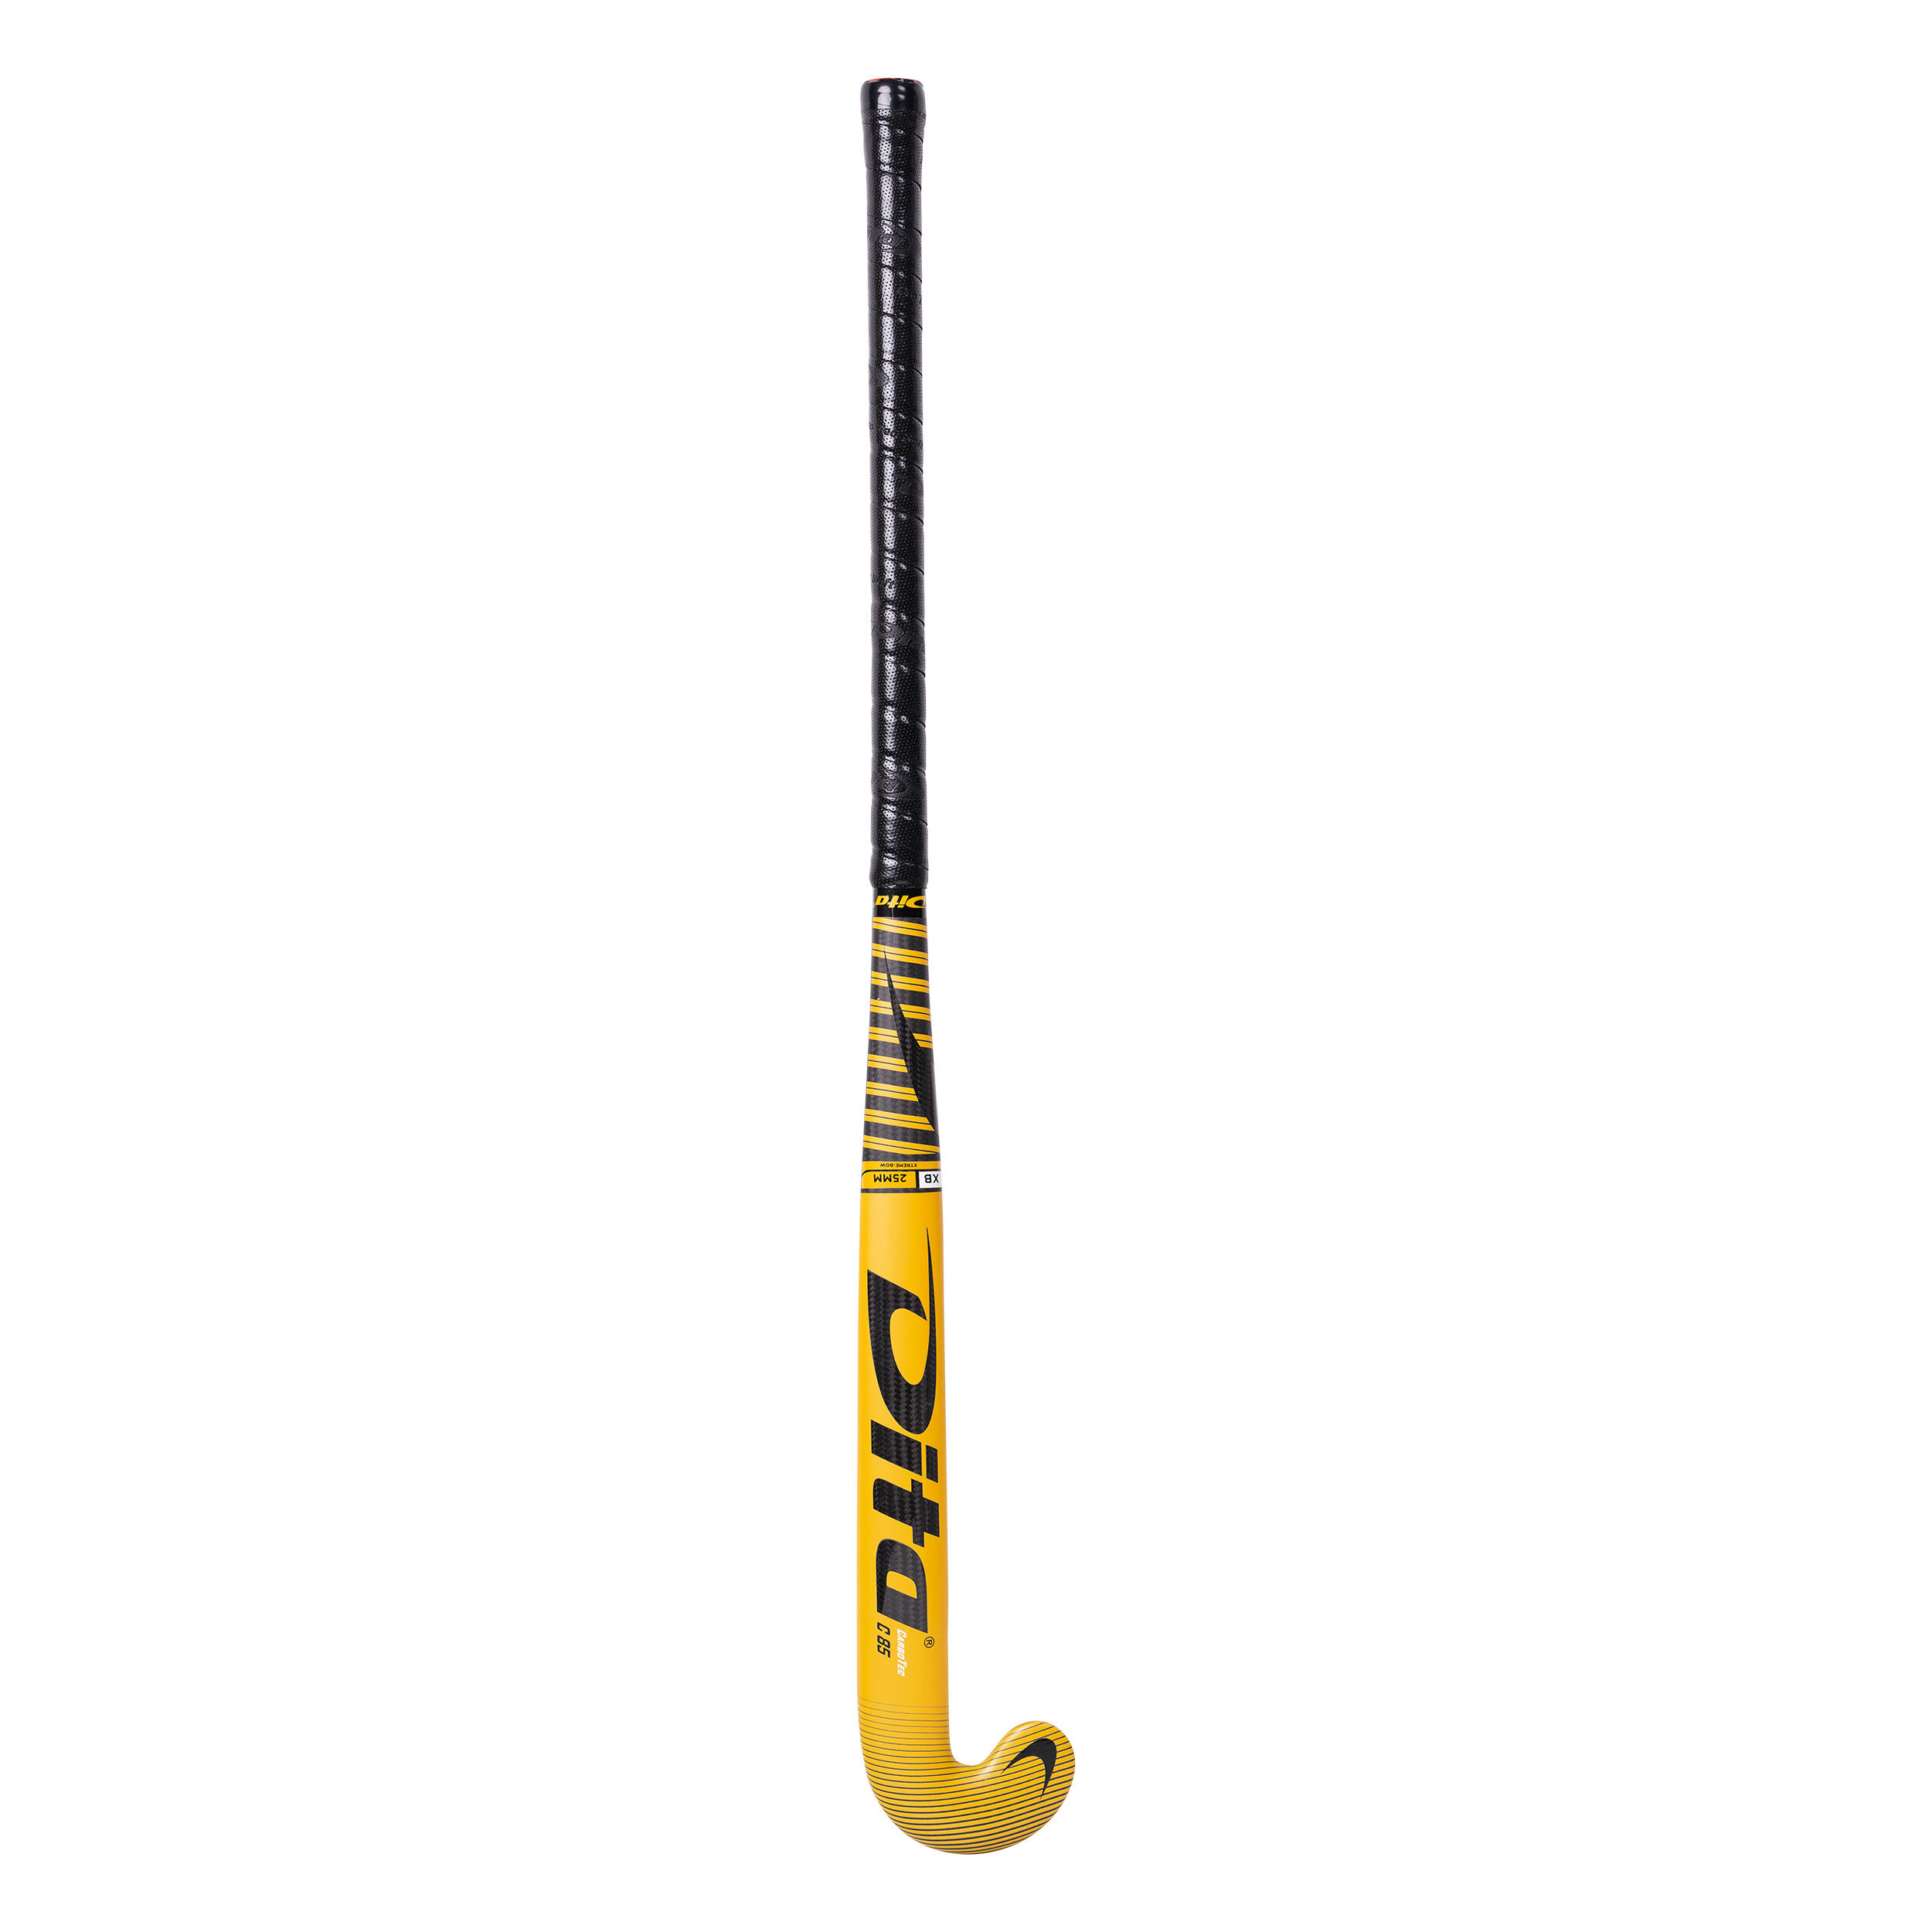 Adult Advanced 85% Carbon X Low Bow Field Hockey Stick carbotecC85 - Gold/Black 3/13